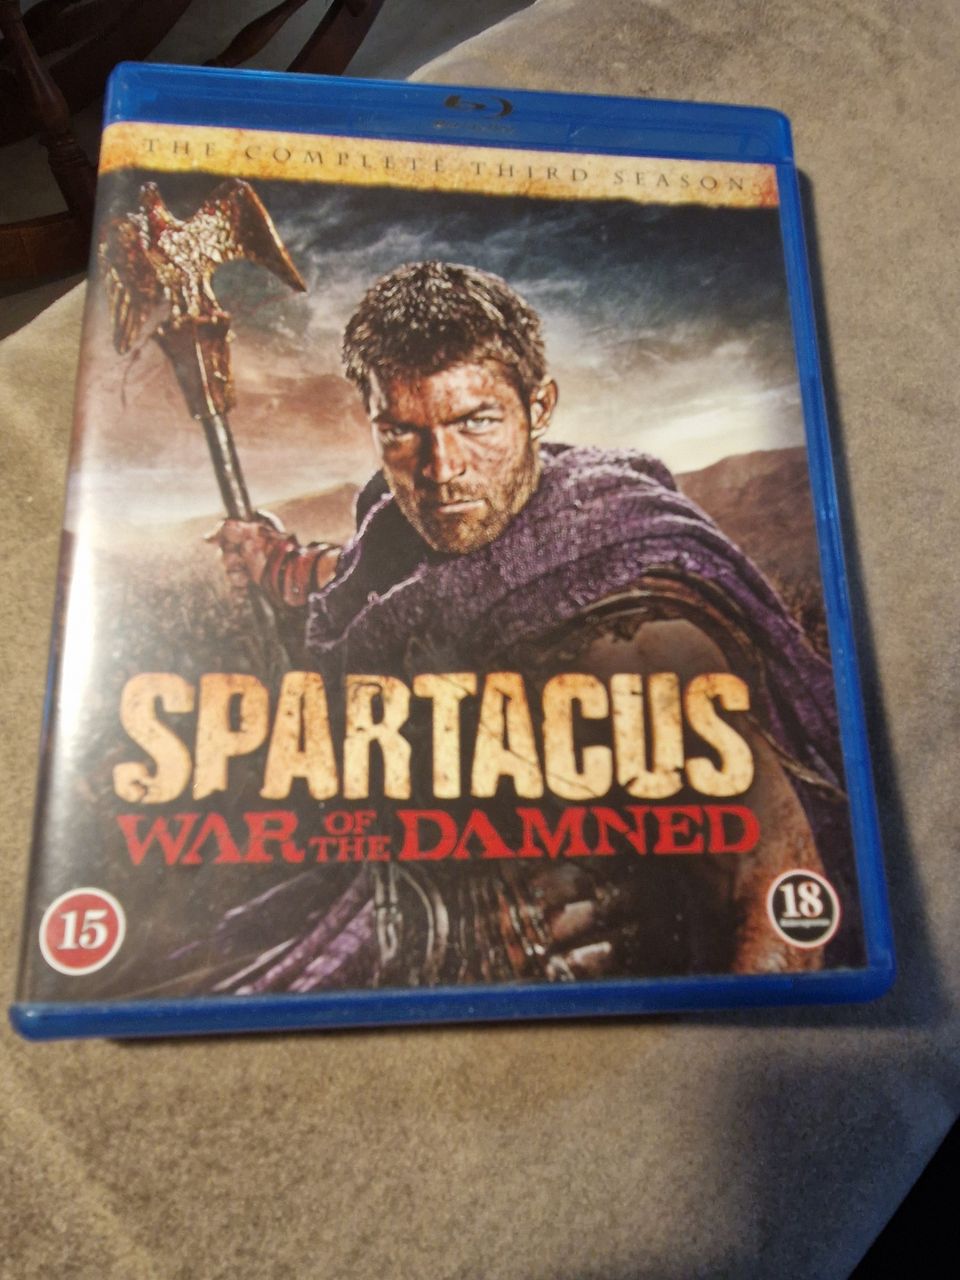 Spartacus war of the damned bluray